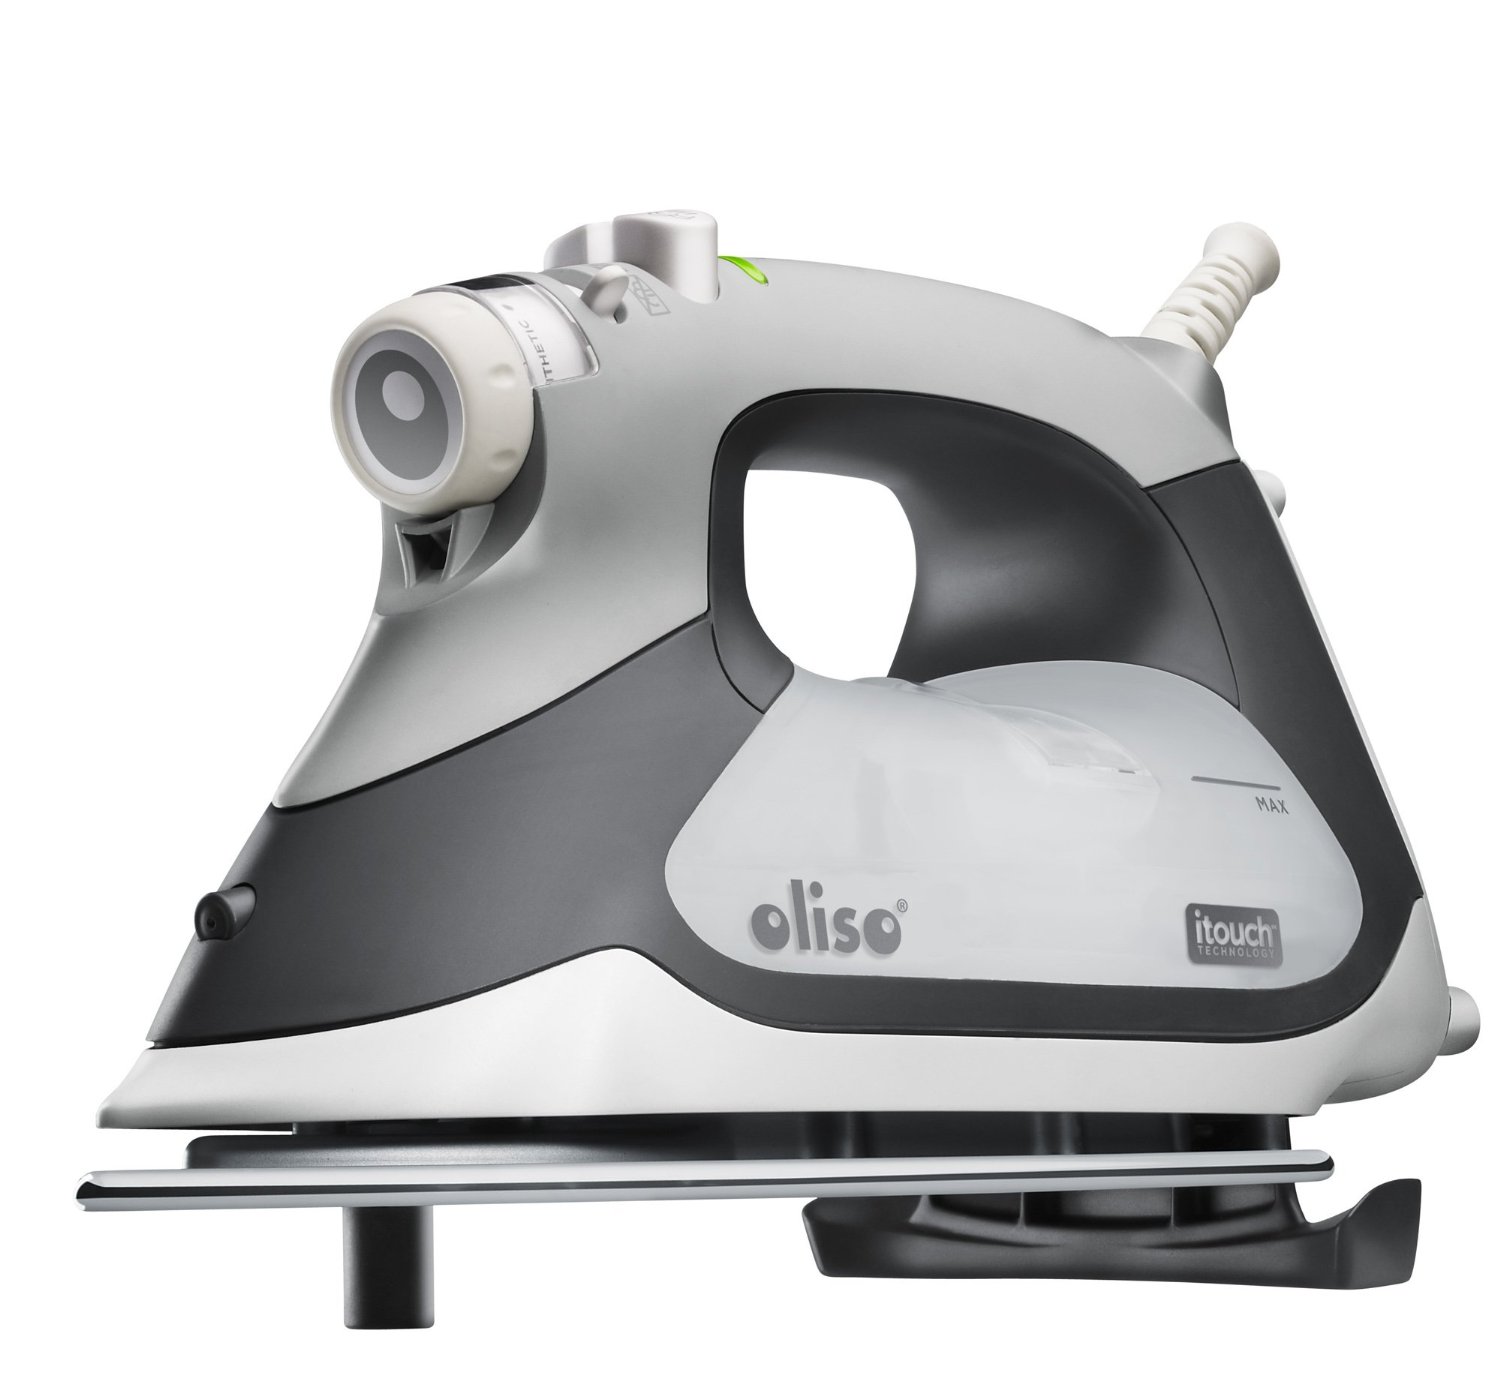 Oliso Pro Iron Review - Pros and Cons